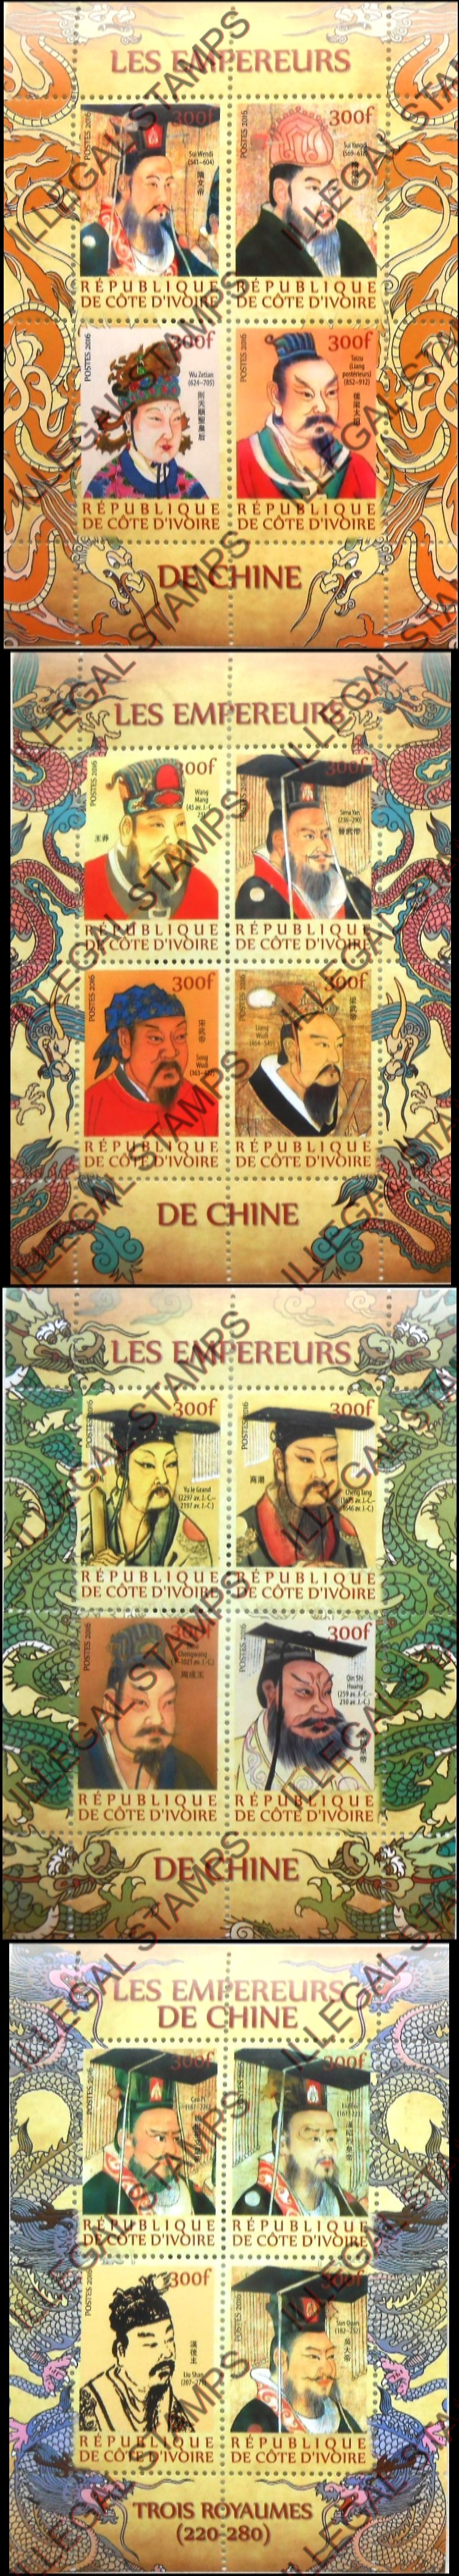 Ivory Coast 2016 Emperors of China Illegal Stamp Souvenir Sheets of 4